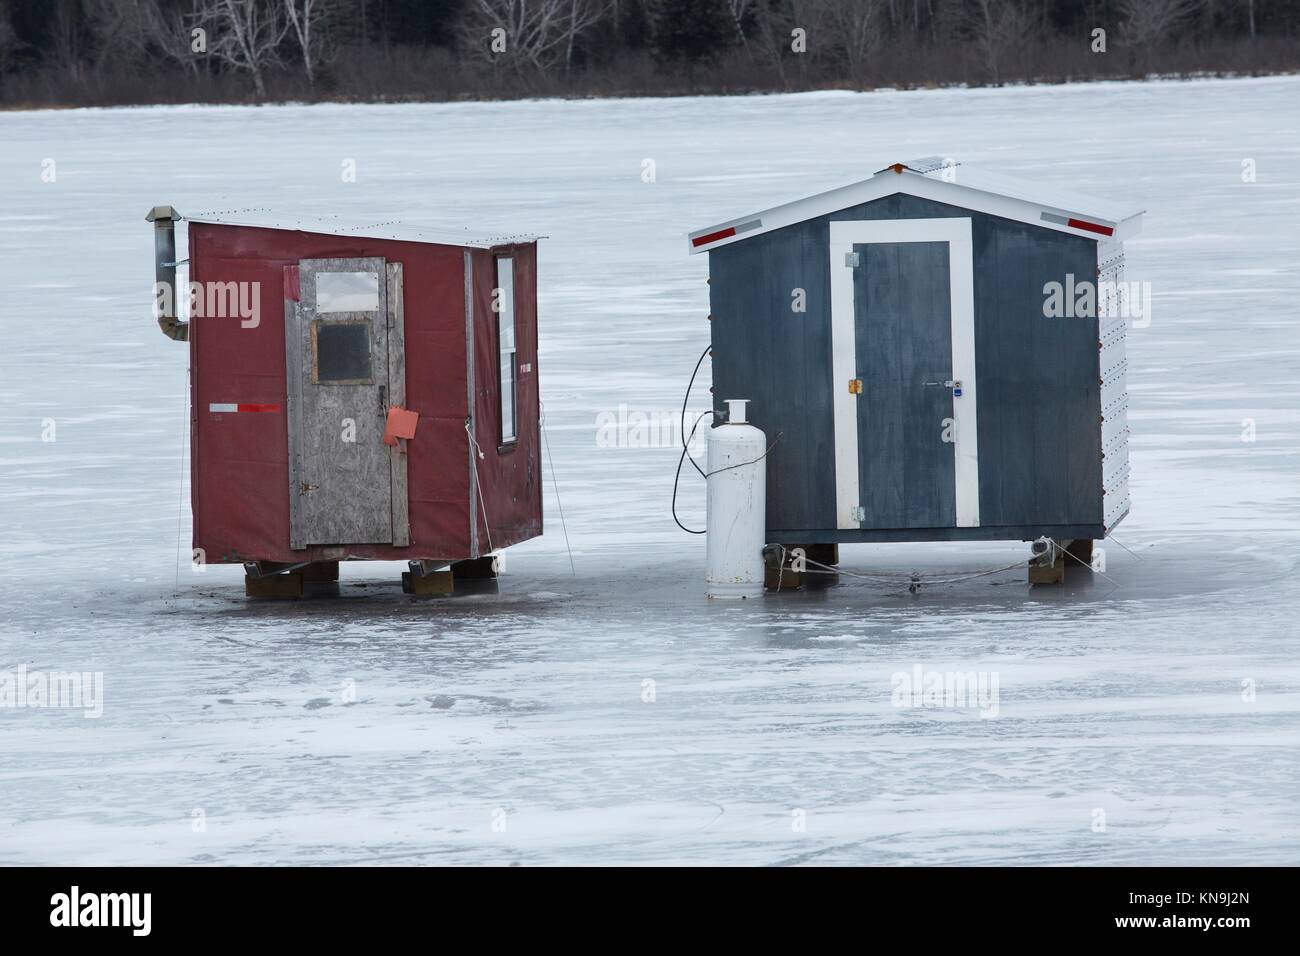 Two red and gray ice fishing shelters sit side by side on the ice